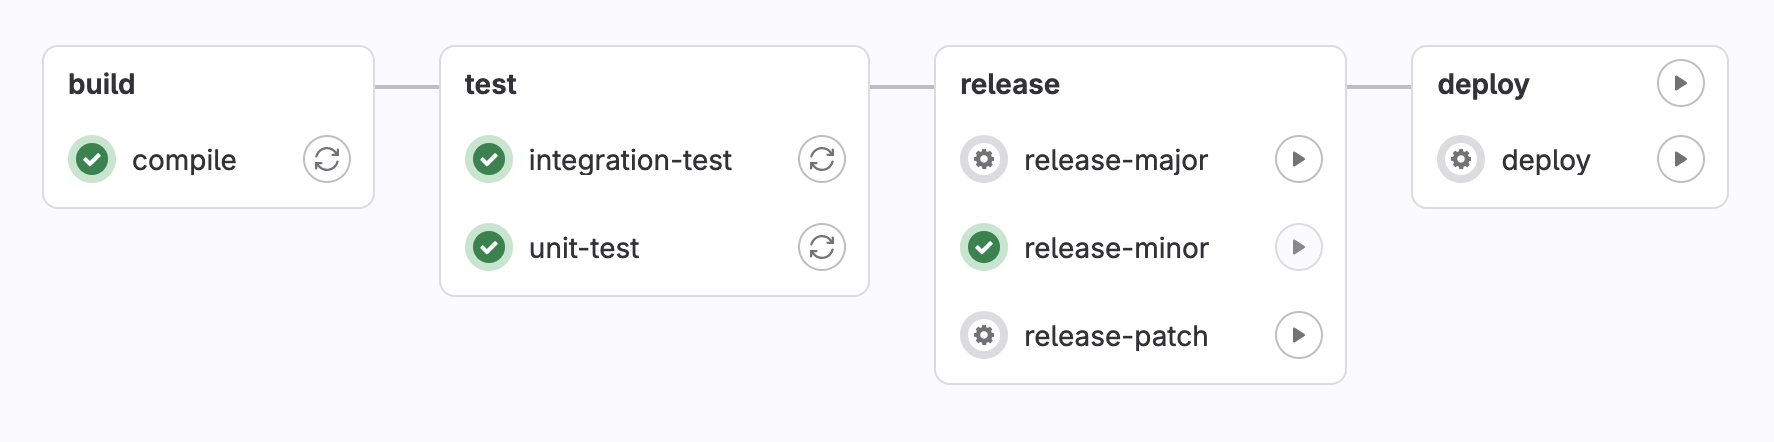 GitLab Pipeline with release steps